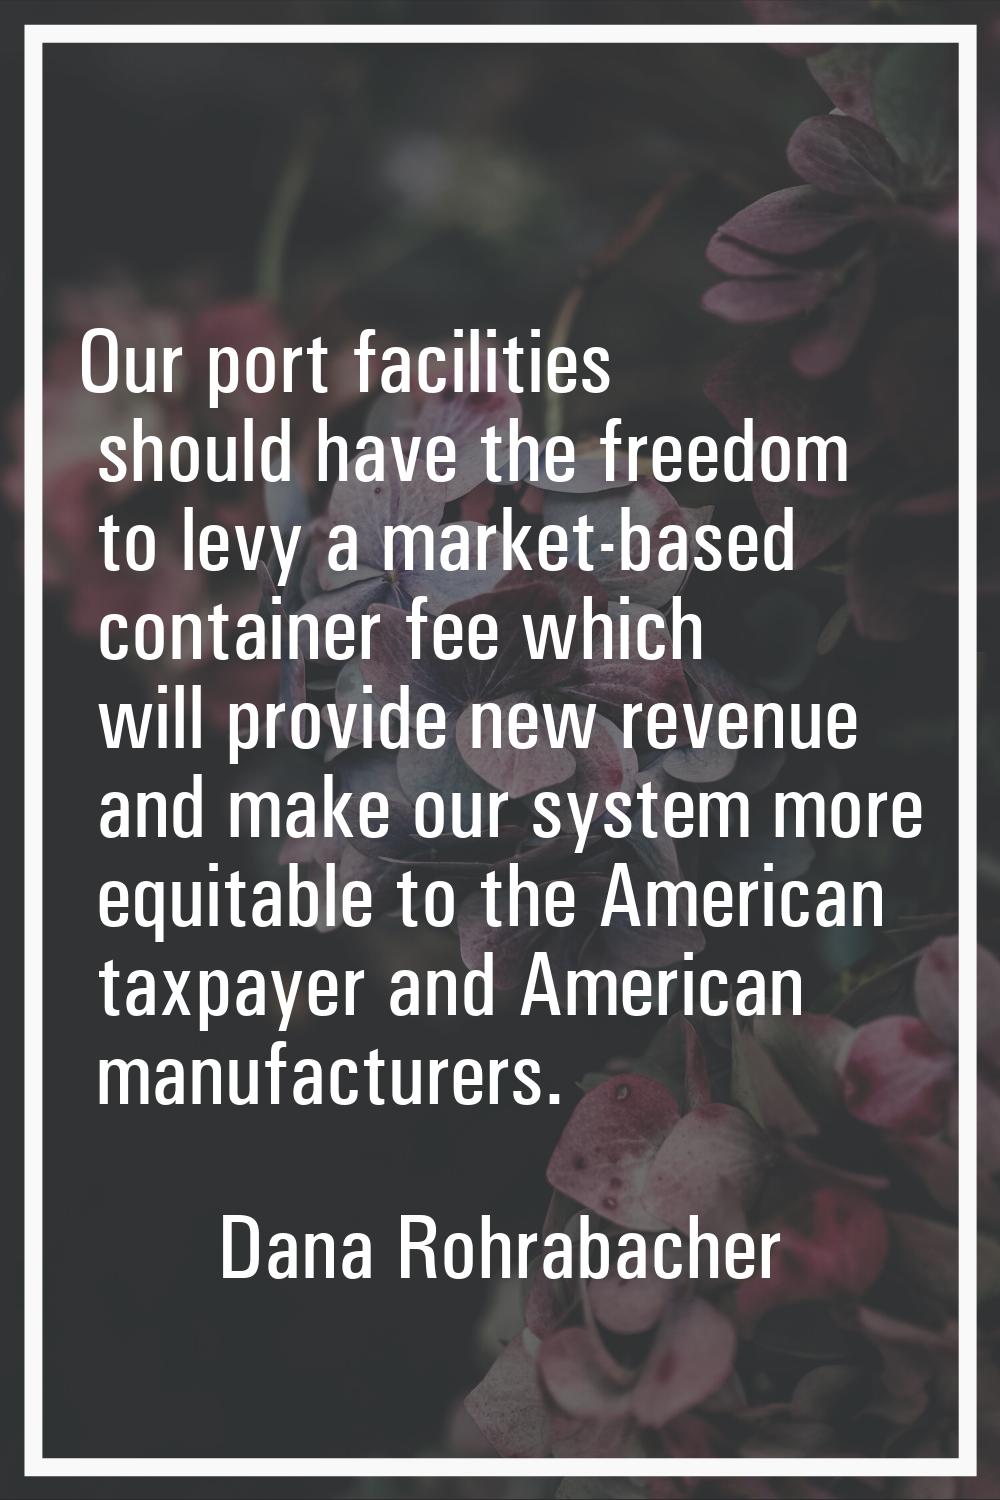 Our port facilities should have the freedom to levy a market-based container fee which will provide